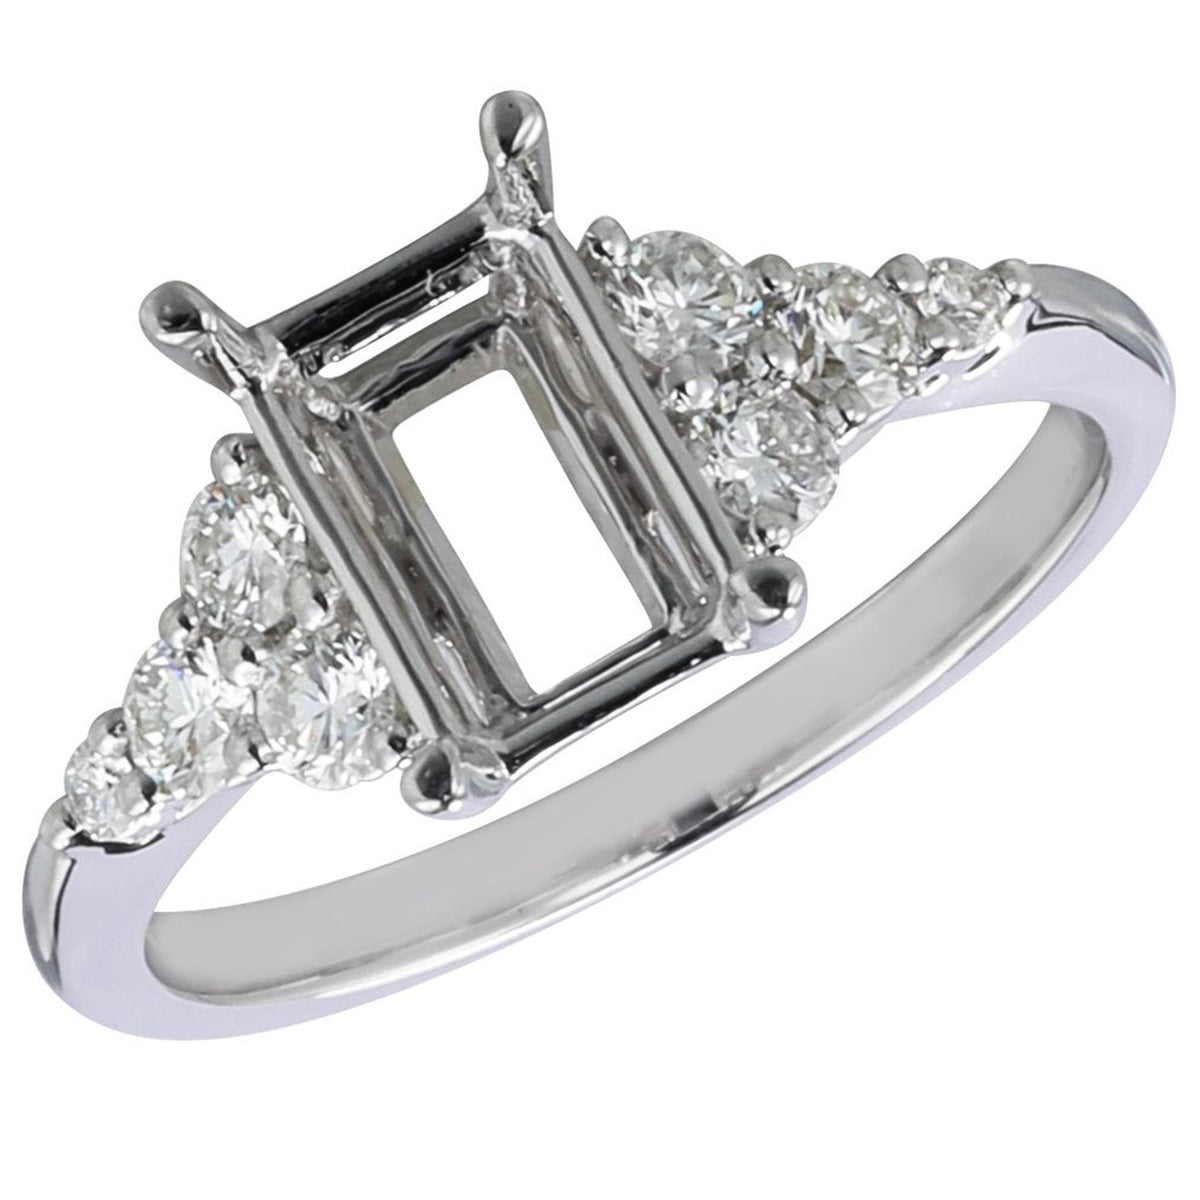 18Kt White Gold Classic Prong Engagement Ring Mounting With 0.41cttw Natural Diamonds